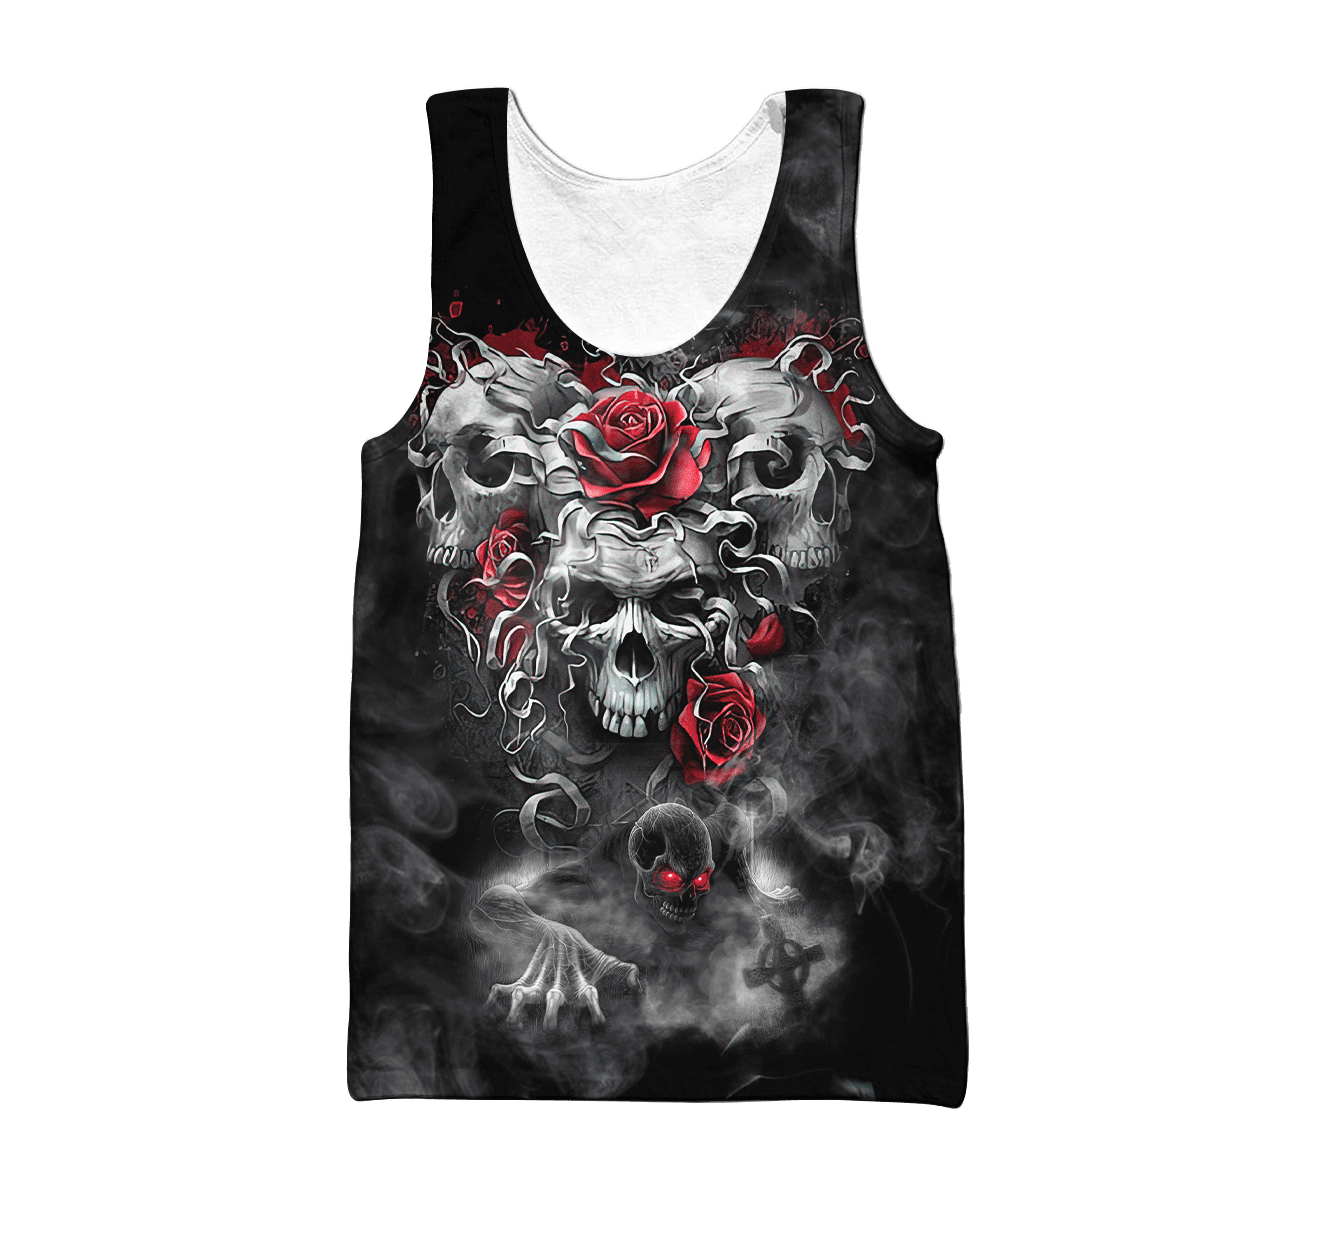 3 Skull Heads Printed Men’s Casual Polyester Tank Top